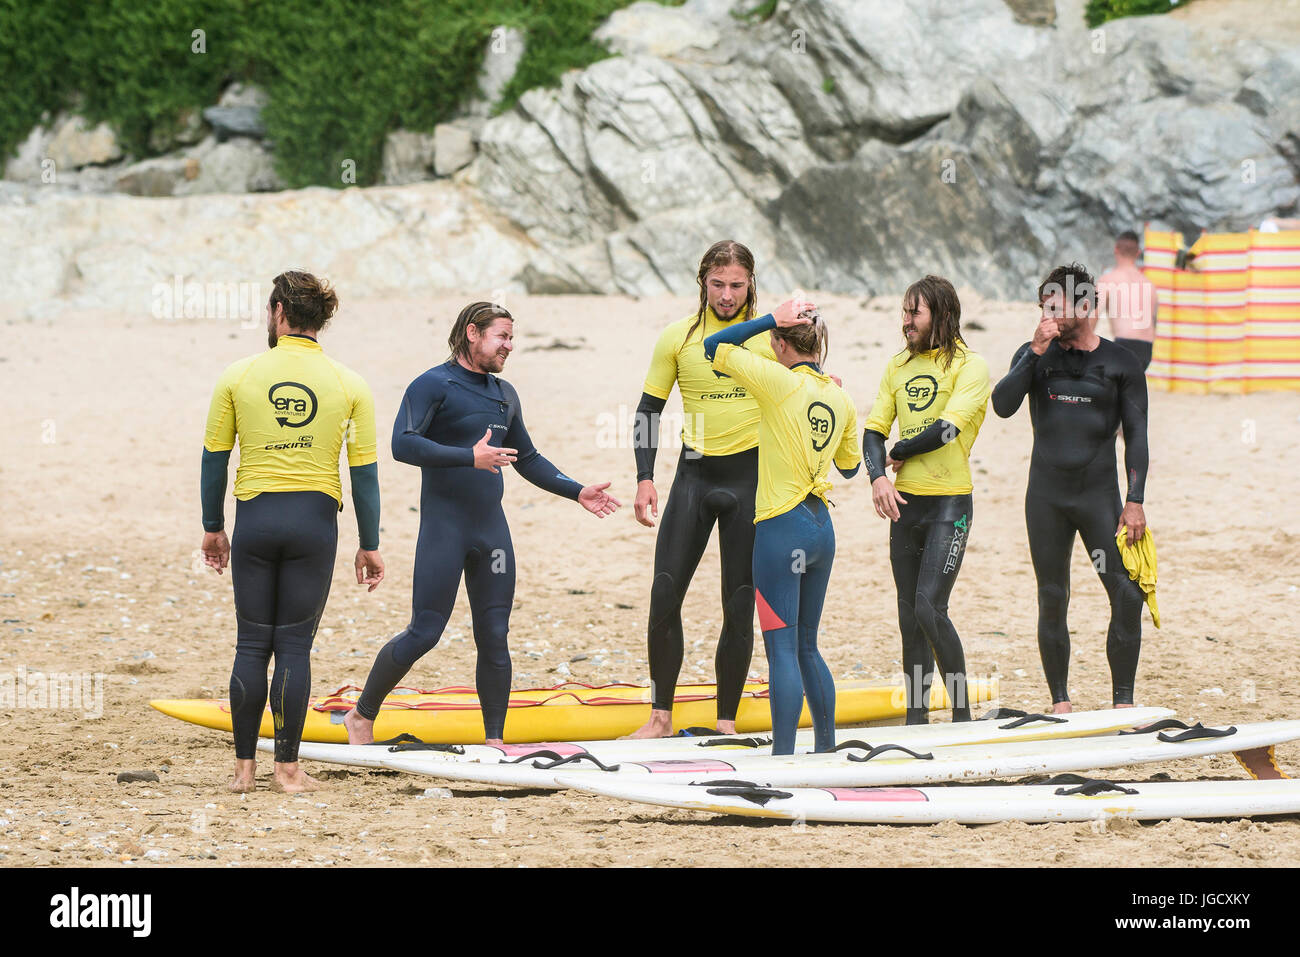 Beach Lifeguard Training on Fistral Beach in Cornwall.  The course is run by Era Adventures. Stock Photo